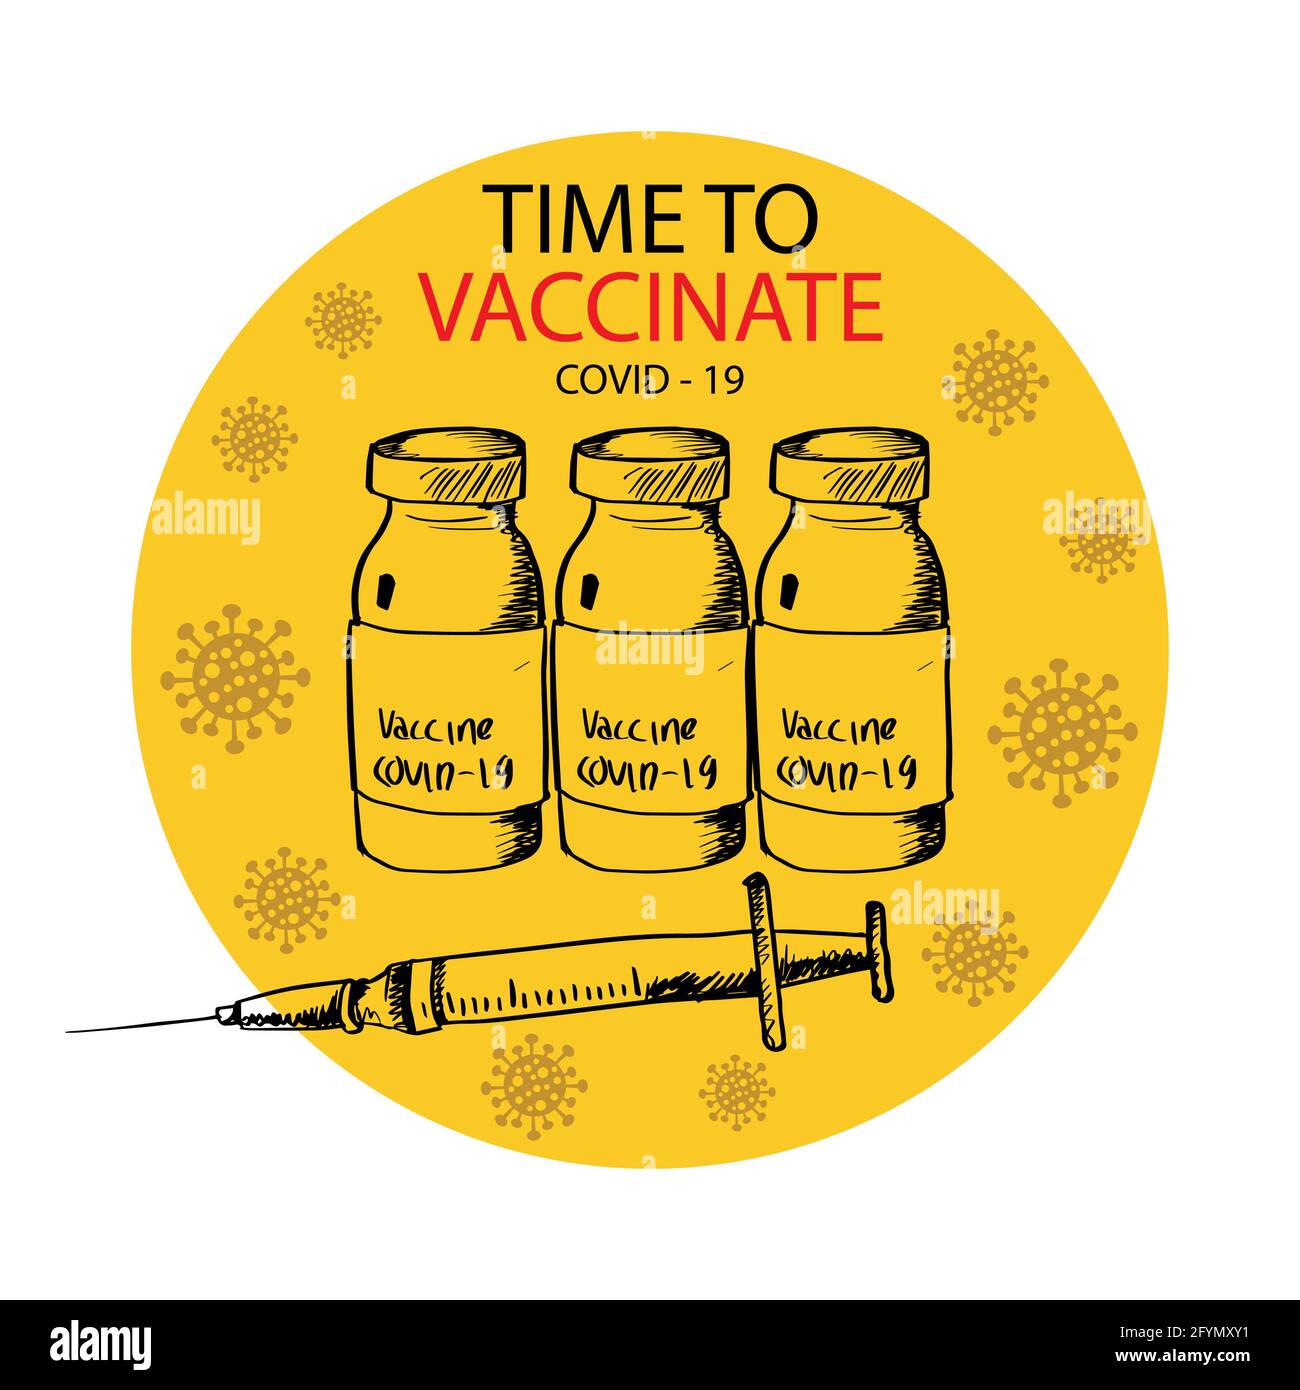 Time to vaccinate. Syringe with a needle Stock Photo